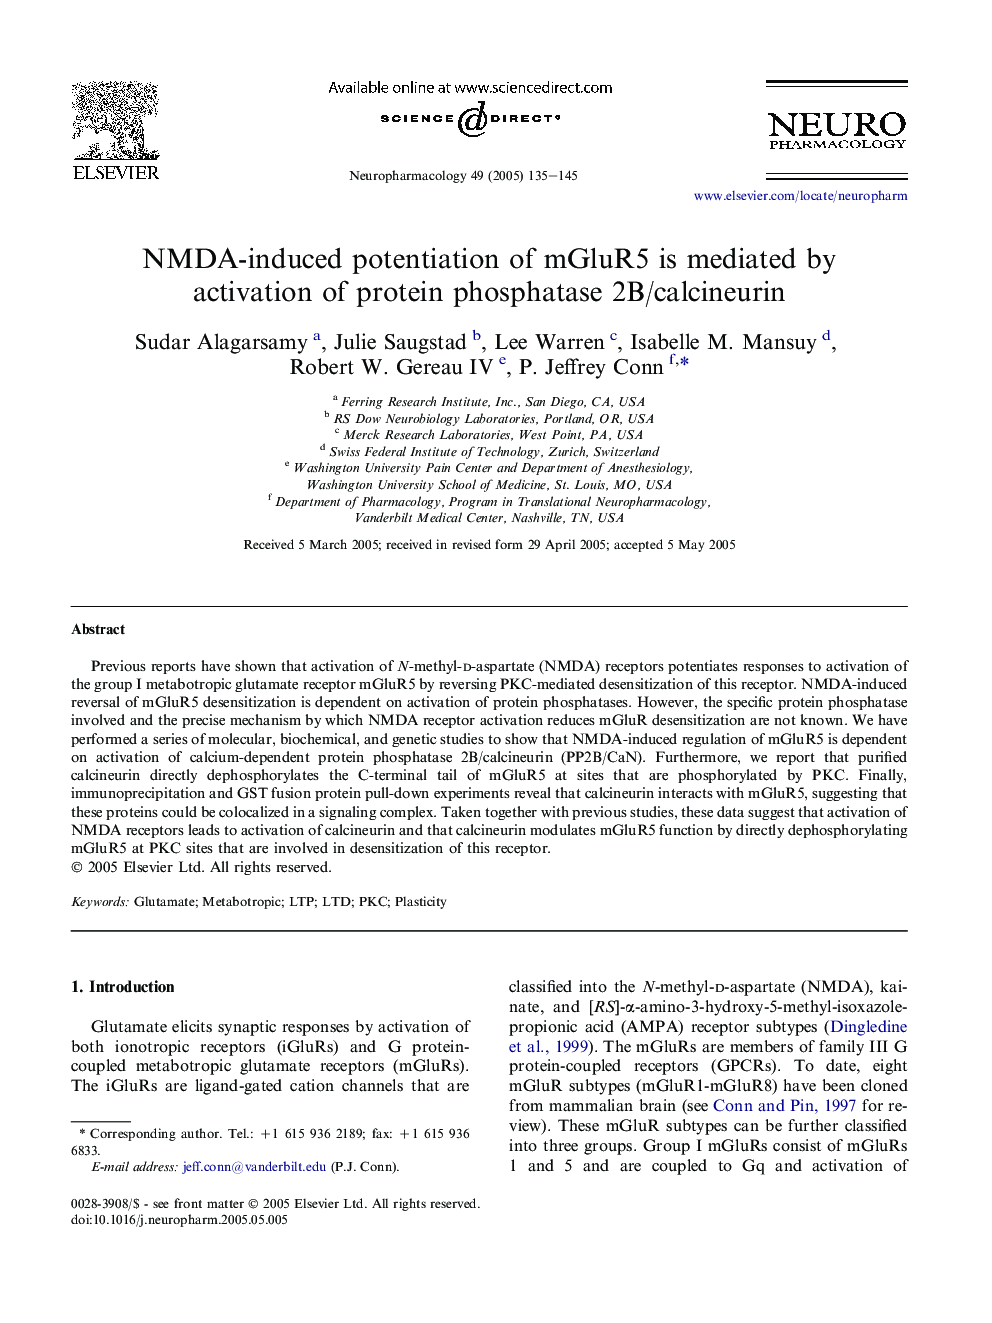 NMDA-induced potentiation of mGluR5 is mediated by activation of protein phosphatase 2B/calcineurin